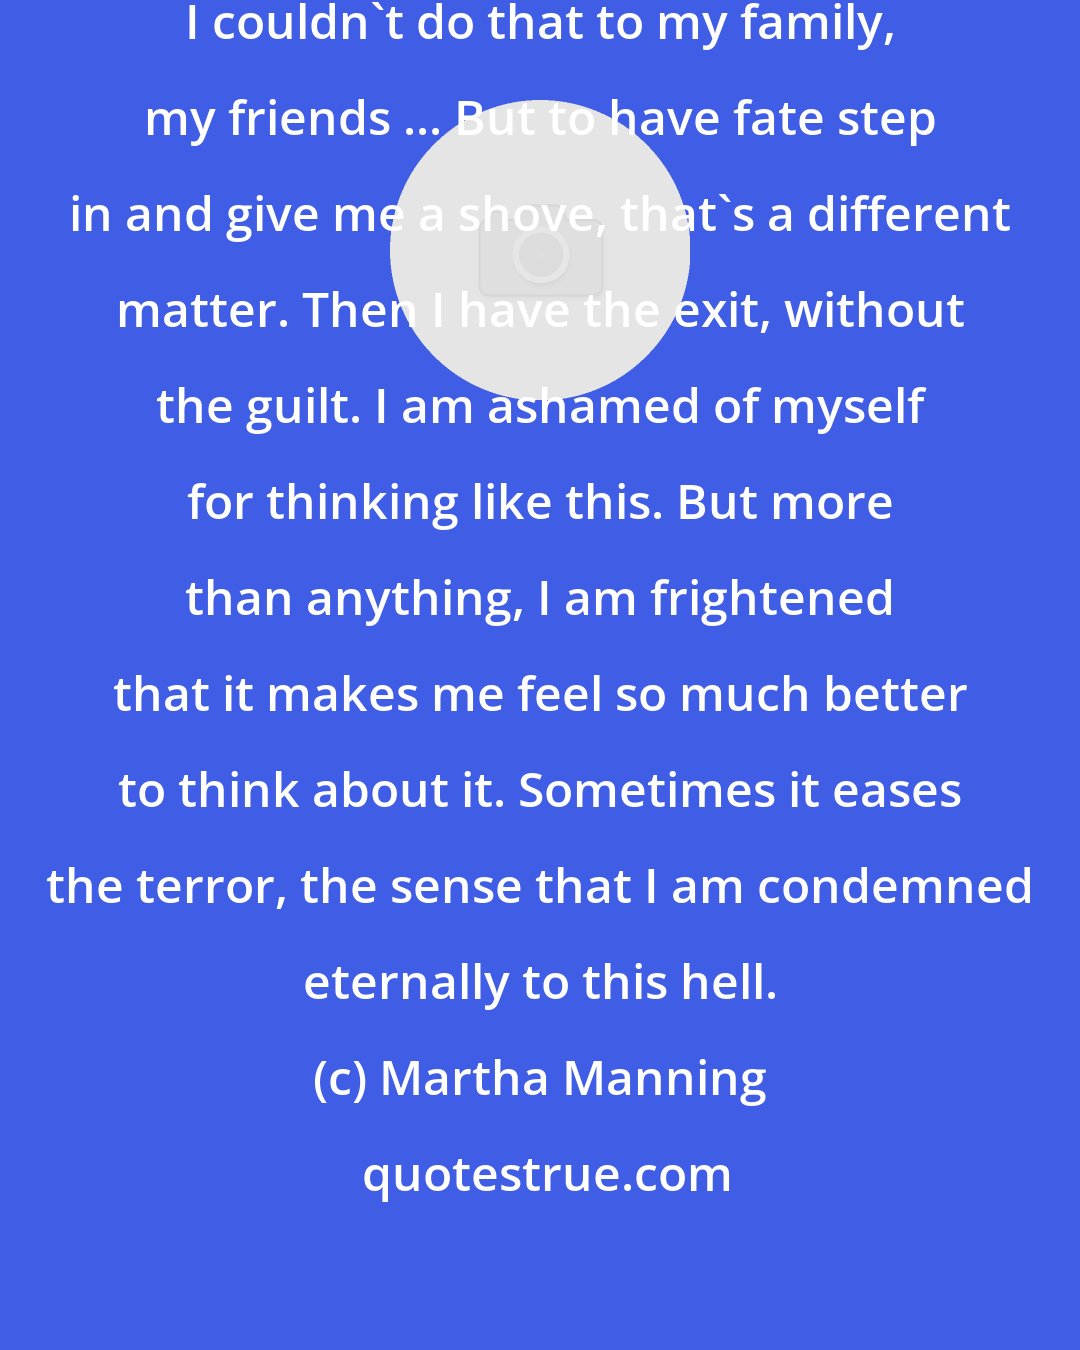 Martha Manning: I would never kill myself intentionally. I couldn't do that to my family, my friends ... But to have fate step in and give me a shove, that's a different matter. Then I have the exit, without the guilt. I am ashamed of myself for thinking like this. But more than anything, I am frightened that it makes me feel so much better to think about it. Sometimes it eases the terror, the sense that I am condemned eternally to this hell.